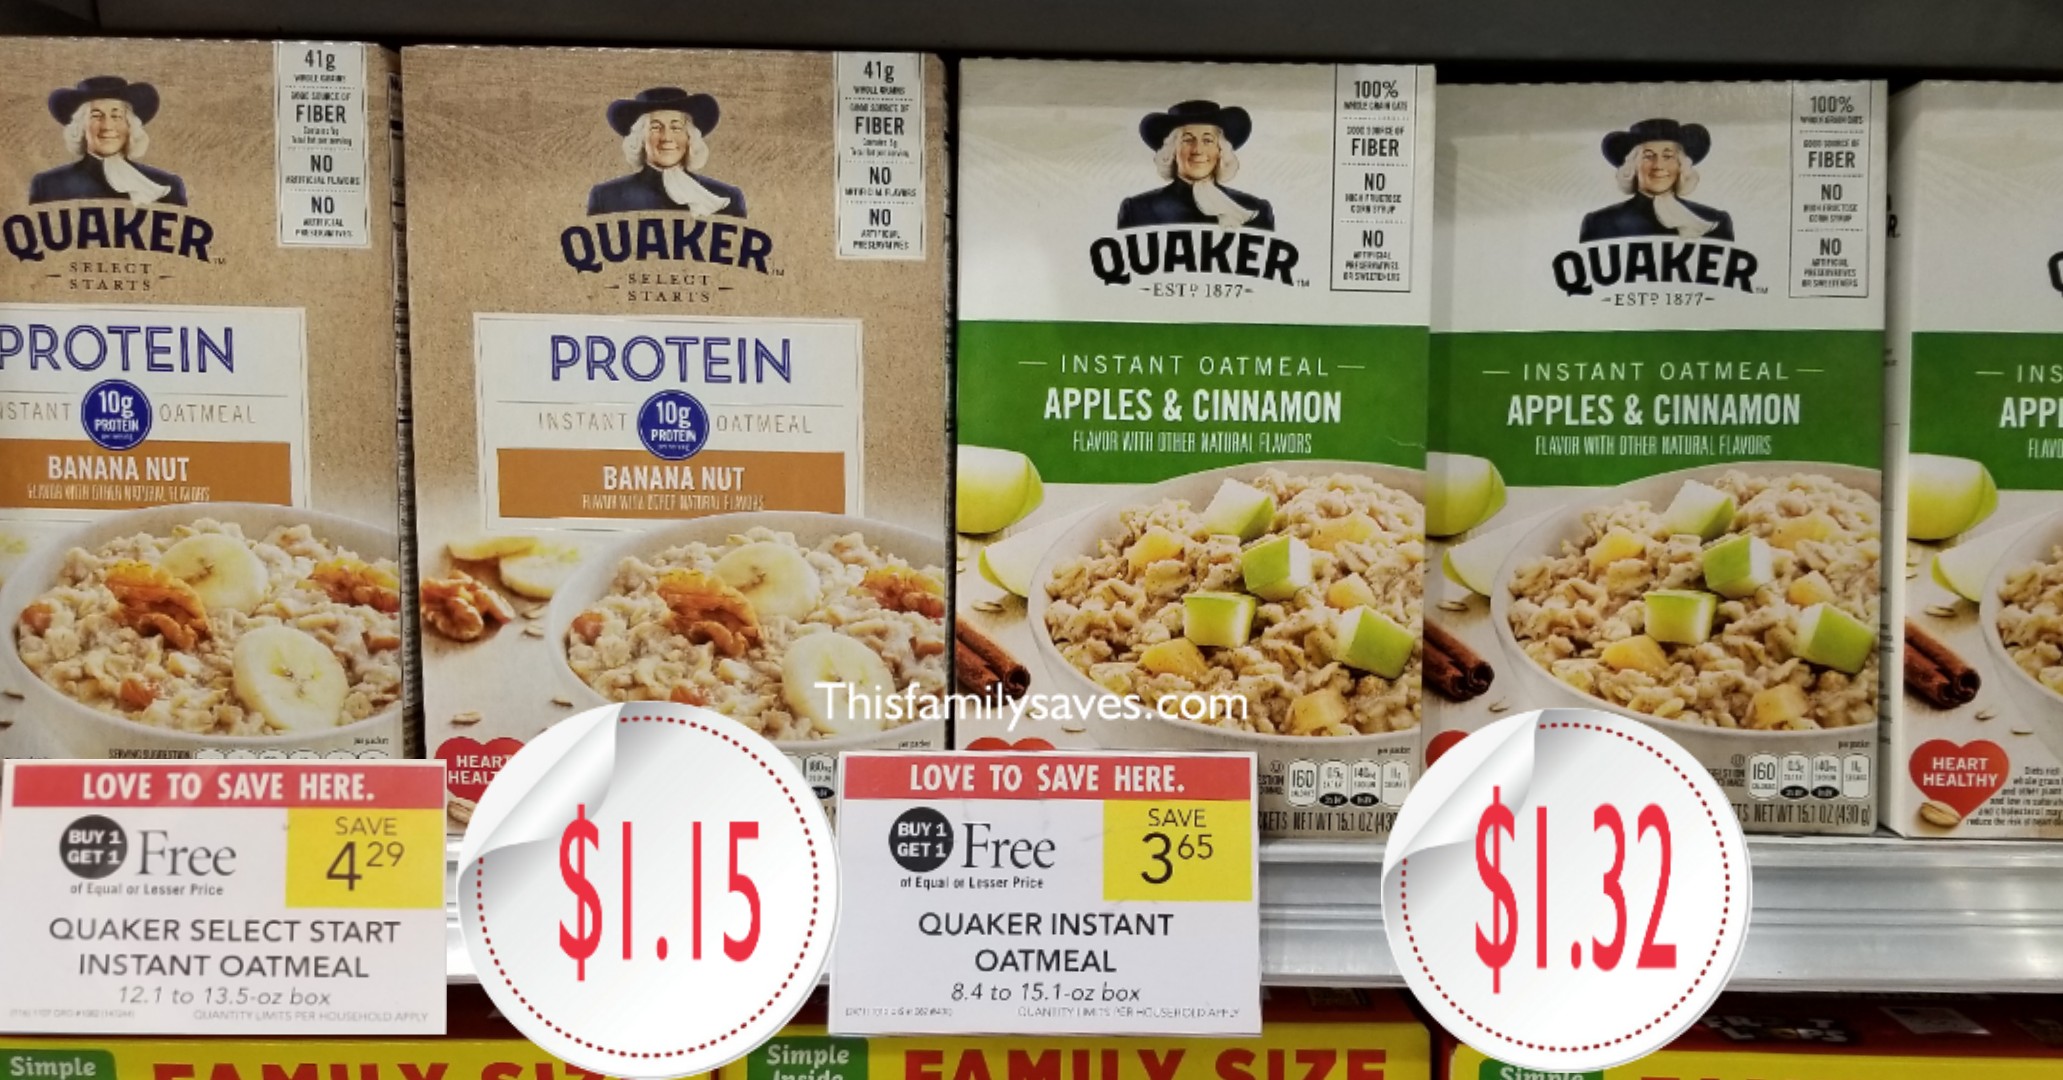 Quaker PROTEIN Instant Oatmeal (Only $1.15 each) – Quaker Instant